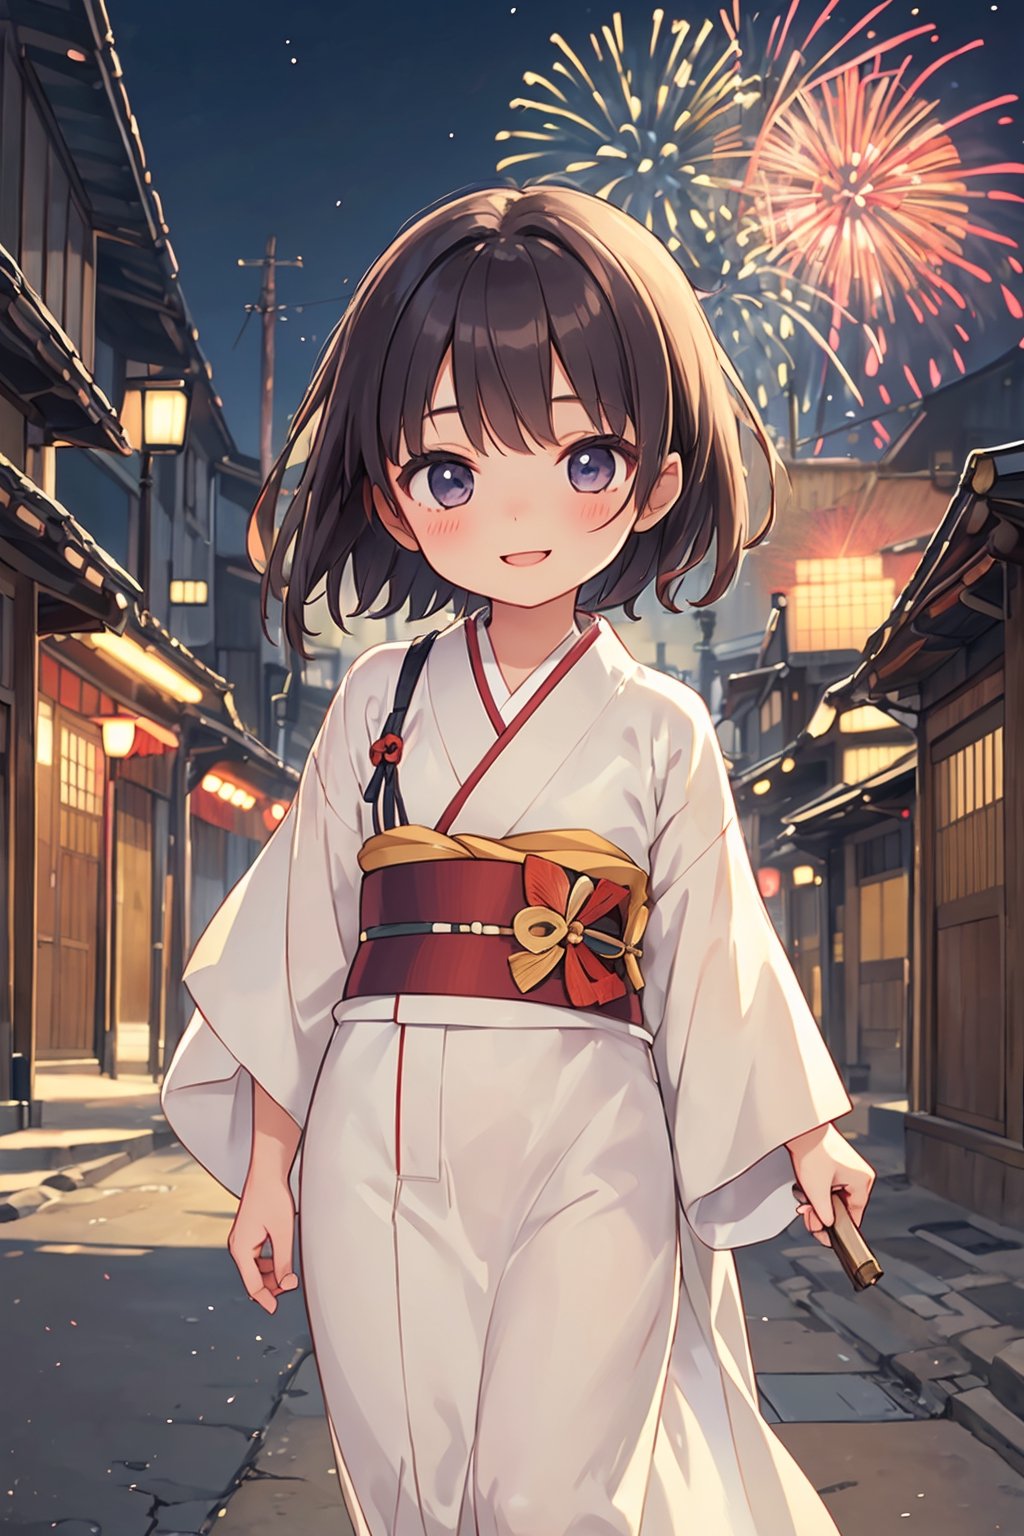 happy. A cute girl wearing a traditional kimono walks through a crowded Edo-era townscape and happily watches beautiful fireworks in the distance.
Age regression, children, larger clothes, Akemi